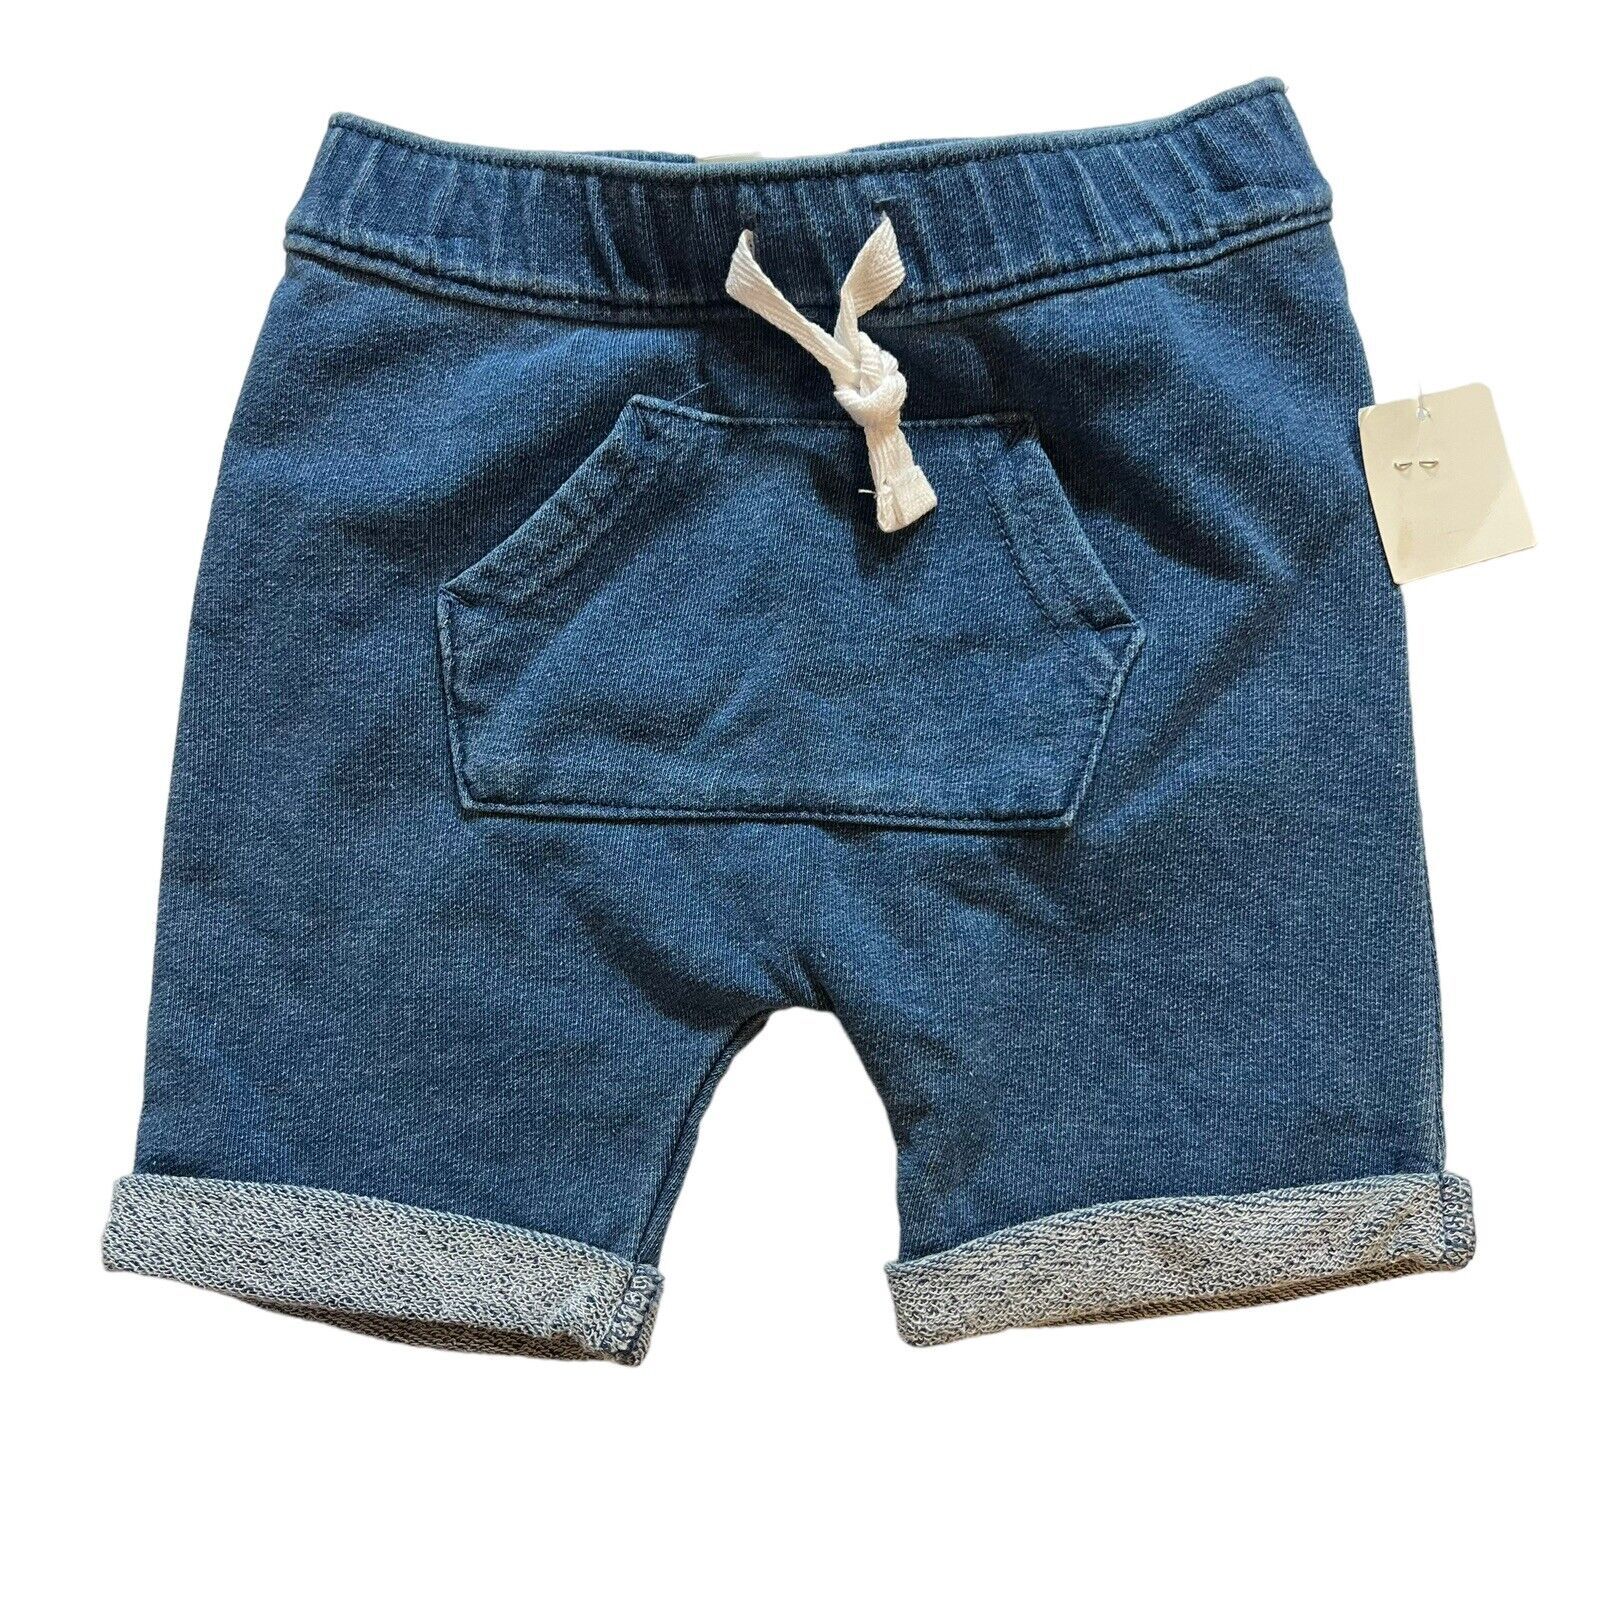 Blue Pull On Shorts First Impressions 12 Months New - $9.75